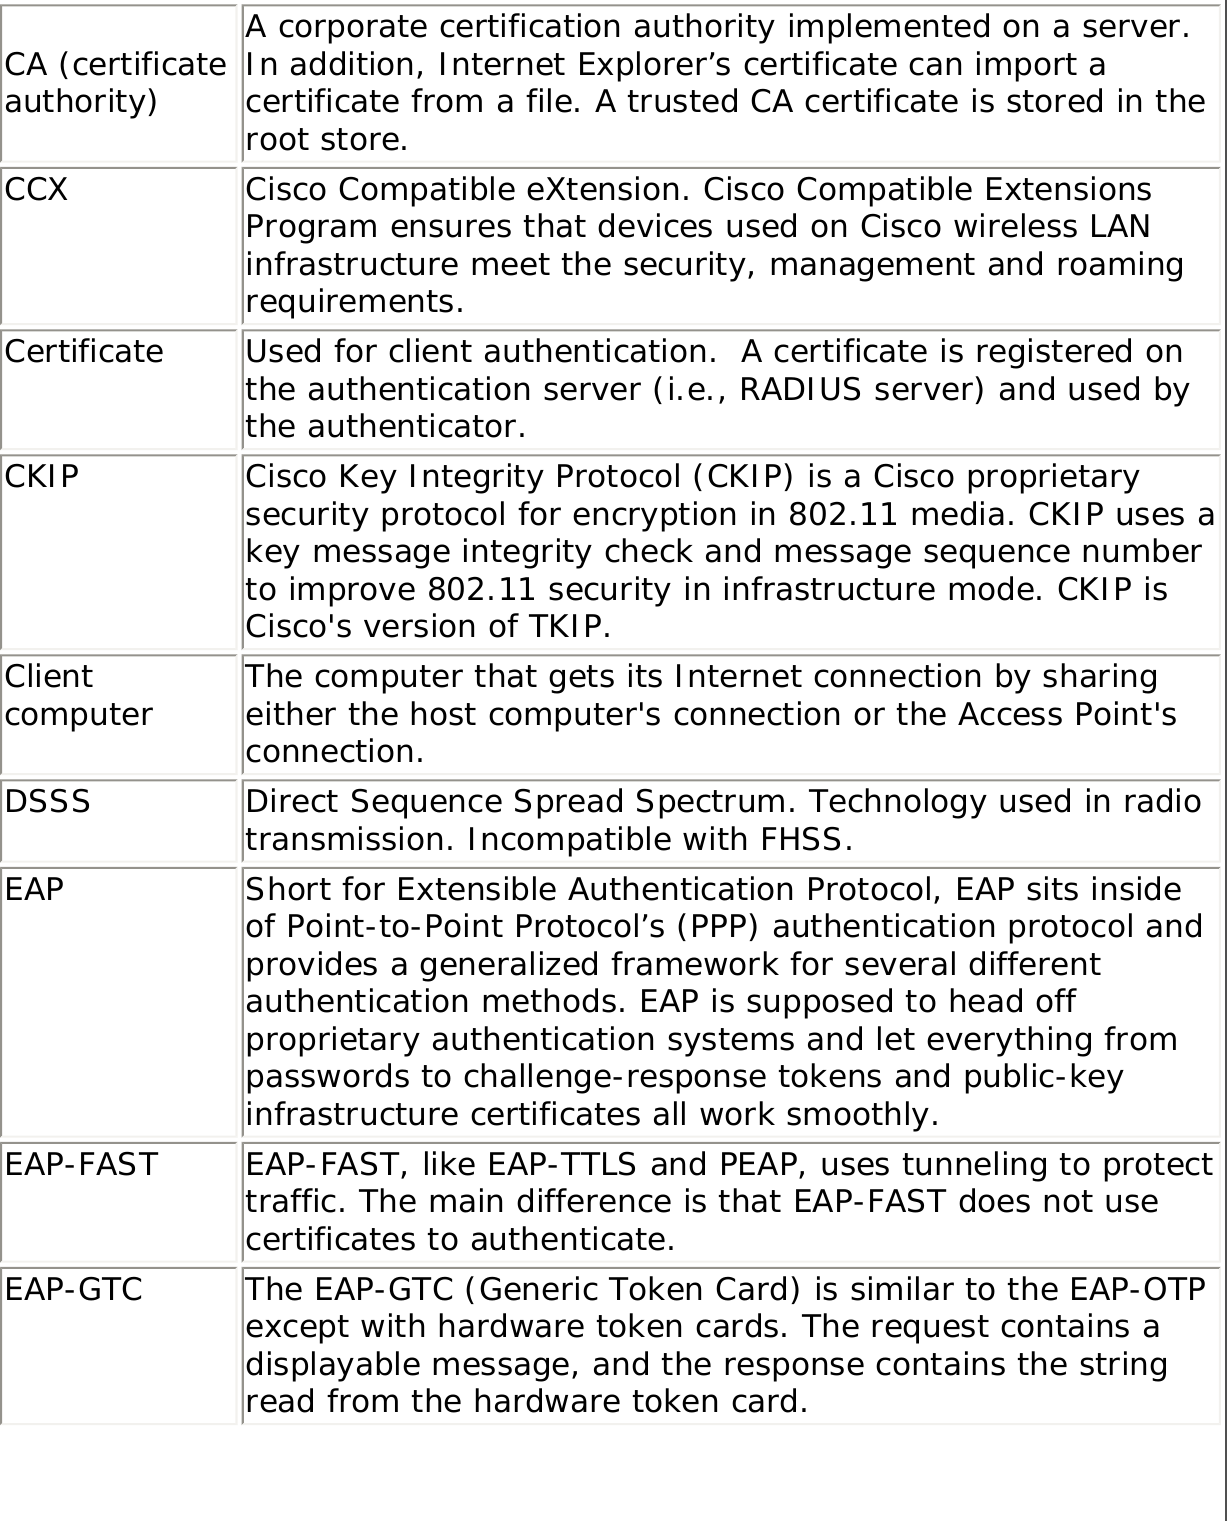 CA (certificate authority)A corporate certification authority implemented on a server. In addition, Internet Explorer’s certificate can import a certificate from a file. A trusted CA certificate is stored in the root store. CCX Cisco Compatible eXtension. Cisco Compatible Extensions Program ensures that devices used on Cisco wireless LAN infrastructure meet the security, management and roaming requirements.Certificate Used for client authentication.  A certificate is registered on the authentication server (i.e., RADIUS server) and used by the authenticator.CKIP Cisco Key Integrity Protocol (CKIP) is a Cisco proprietary security protocol for encryption in 802.11 media. CKIP uses a key message integrity check and message sequence number to improve 802.11 security in infrastructure mode. CKIP is Cisco&apos;s version of TKIP.Client computer The computer that gets its Internet connection by sharing either the host computer&apos;s connection or the Access Point&apos;s connection.DSSS Direct Sequence Spread Spectrum. Technology used in radio transmission. Incompatible with FHSS.EAP Short for Extensible Authentication Protocol, EAP sits inside of Point-to-Point Protocol’s (PPP) authentication protocol and provides a generalized framework for several different authentication methods. EAP is supposed to head off proprietary authentication systems and let everything from passwords to challenge-response tokens and public-key infrastructure certificates all work smoothly.EAP-FAST EAP-FAST, like EAP-TTLS and PEAP, uses tunneling to protect traffic. The main difference is that EAP-FAST does not use certificates to authenticate. EAP-GTC The EAP-GTC (Generic Token Card) is similar to the EAP-OTP except with hardware token cards. The request contains a displayable message, and the response contains the string read from the hardware token card. 